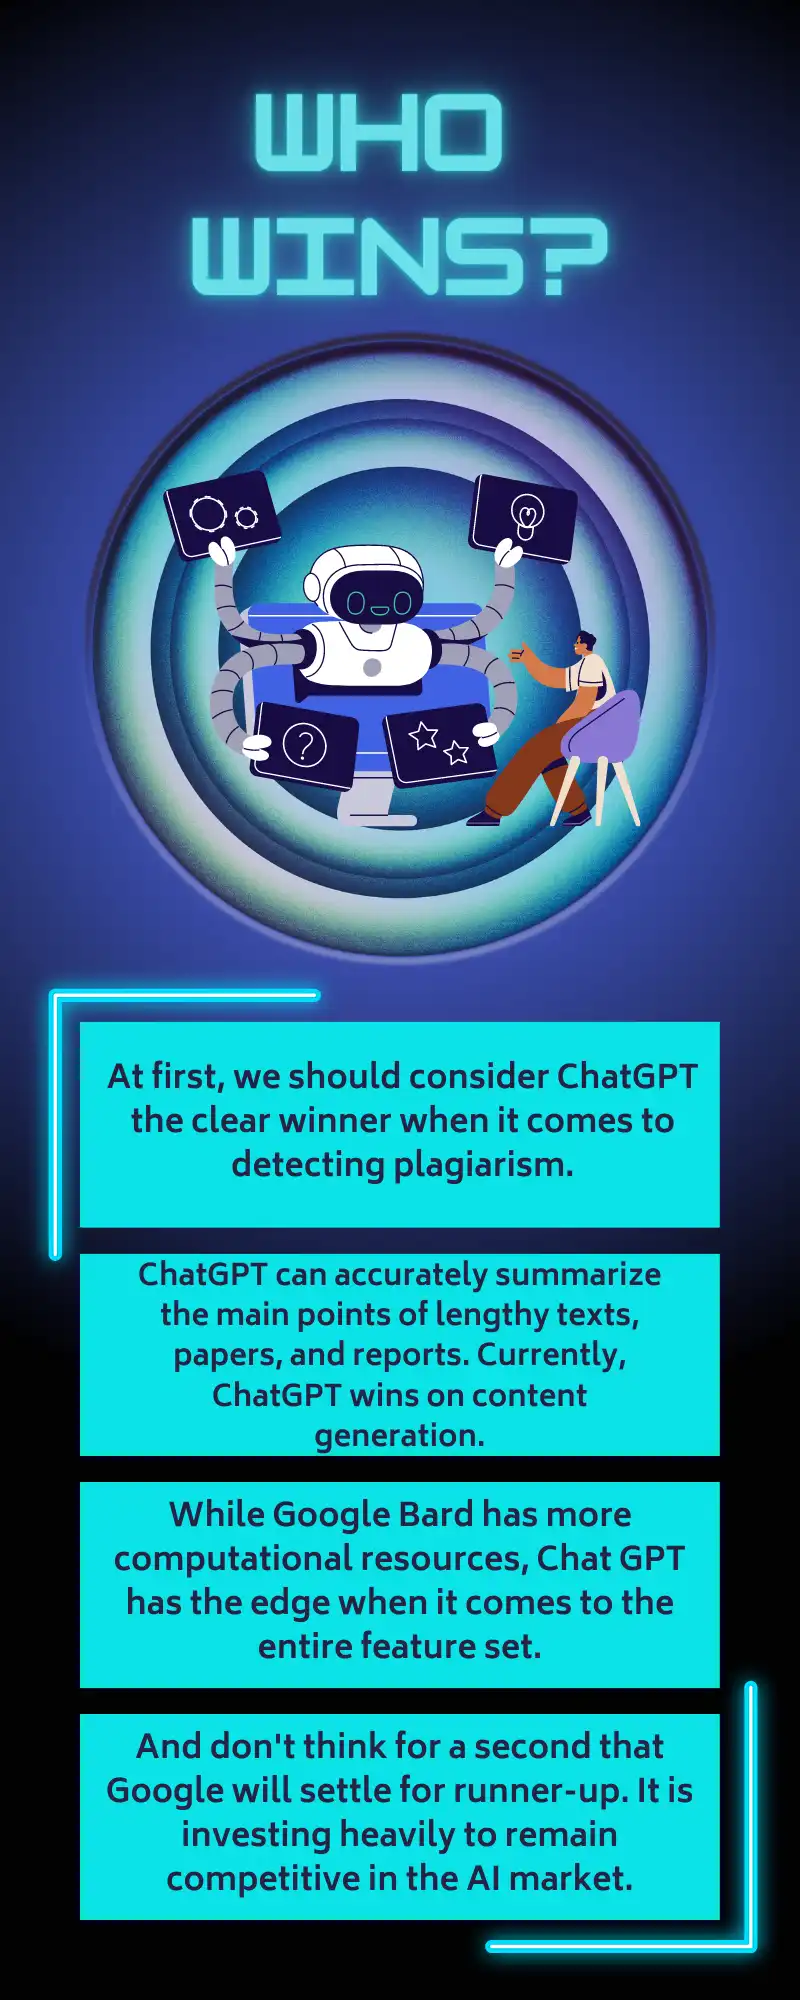 An infographic about ChatGpt and Google Bart